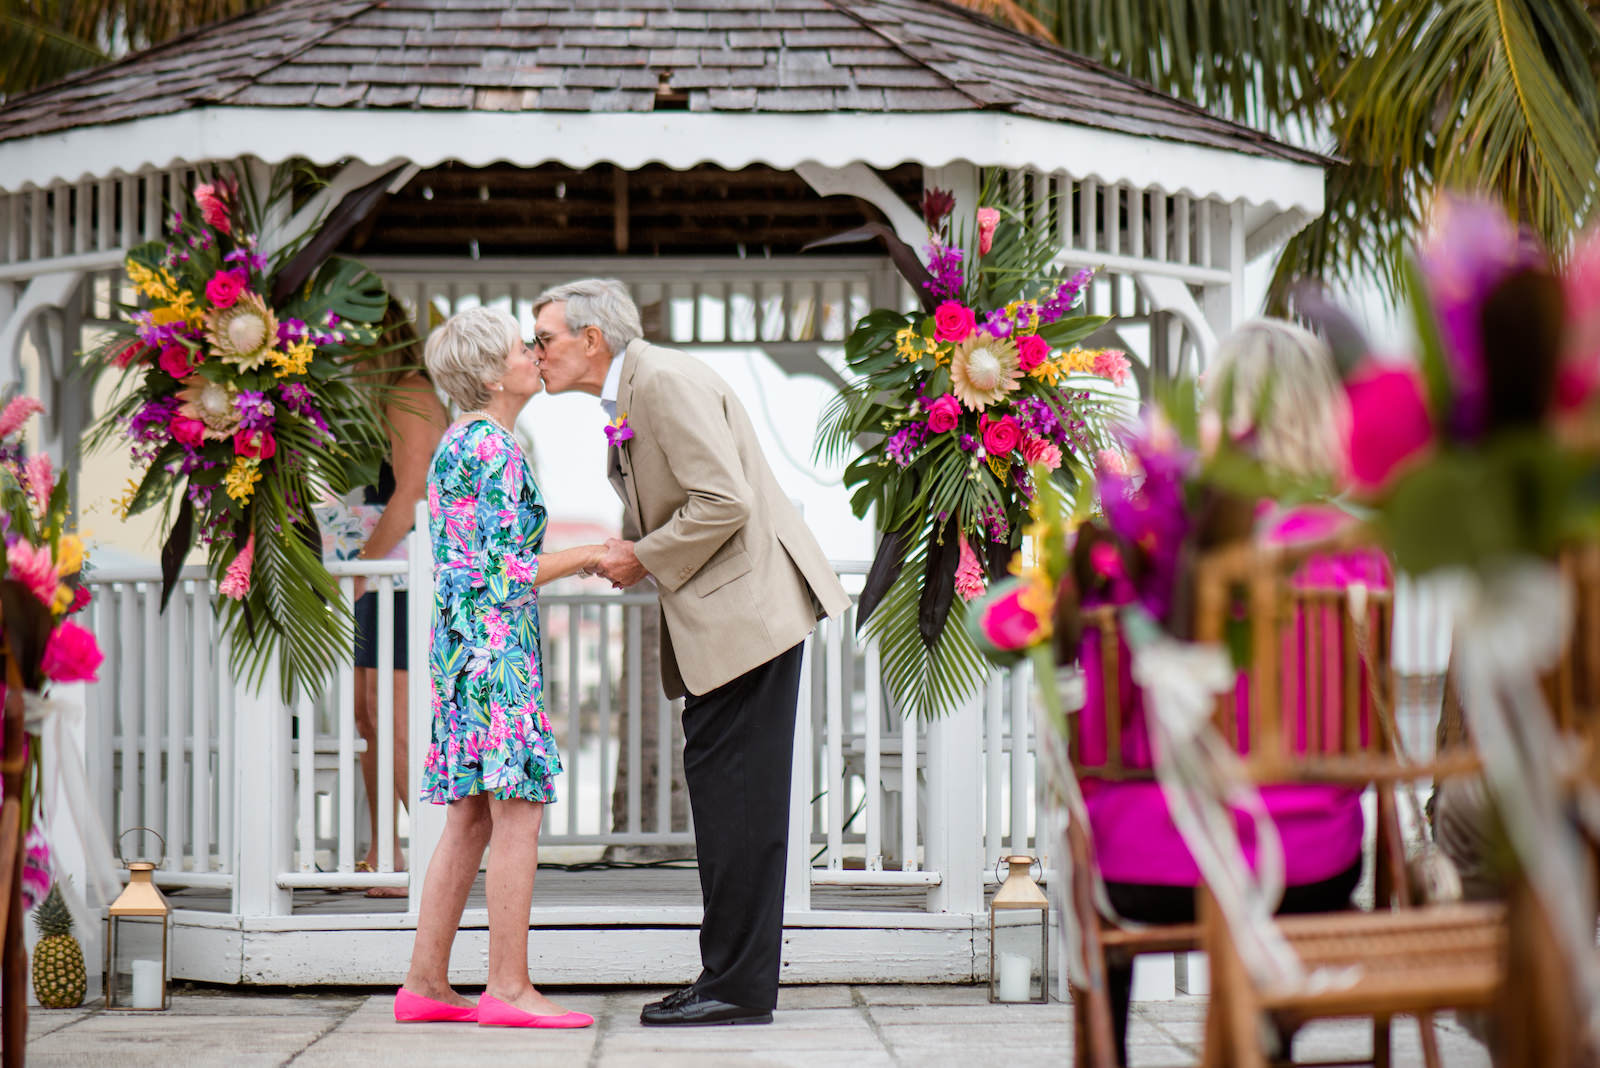 Florida Husband and Wife Kiss at Tropical Wedding Vow Renewal Ceremony with Decor, Bamboo Folding Chairs, Lilly Pulitzer Themed Floral Arrangements, Gazebo Alter with Bright Pink Exotic Flowers, Purple Stems, Blush King Proteas, with Green Palms and Monstera Leafs | Tampa Bay Vow Renewal and Micro wedding Planner Perfecting The Plan | St. Petersburg Private Beachfront Venue Isla Del Sol | St. Pete Beach DJ Grant Hemond & Associates